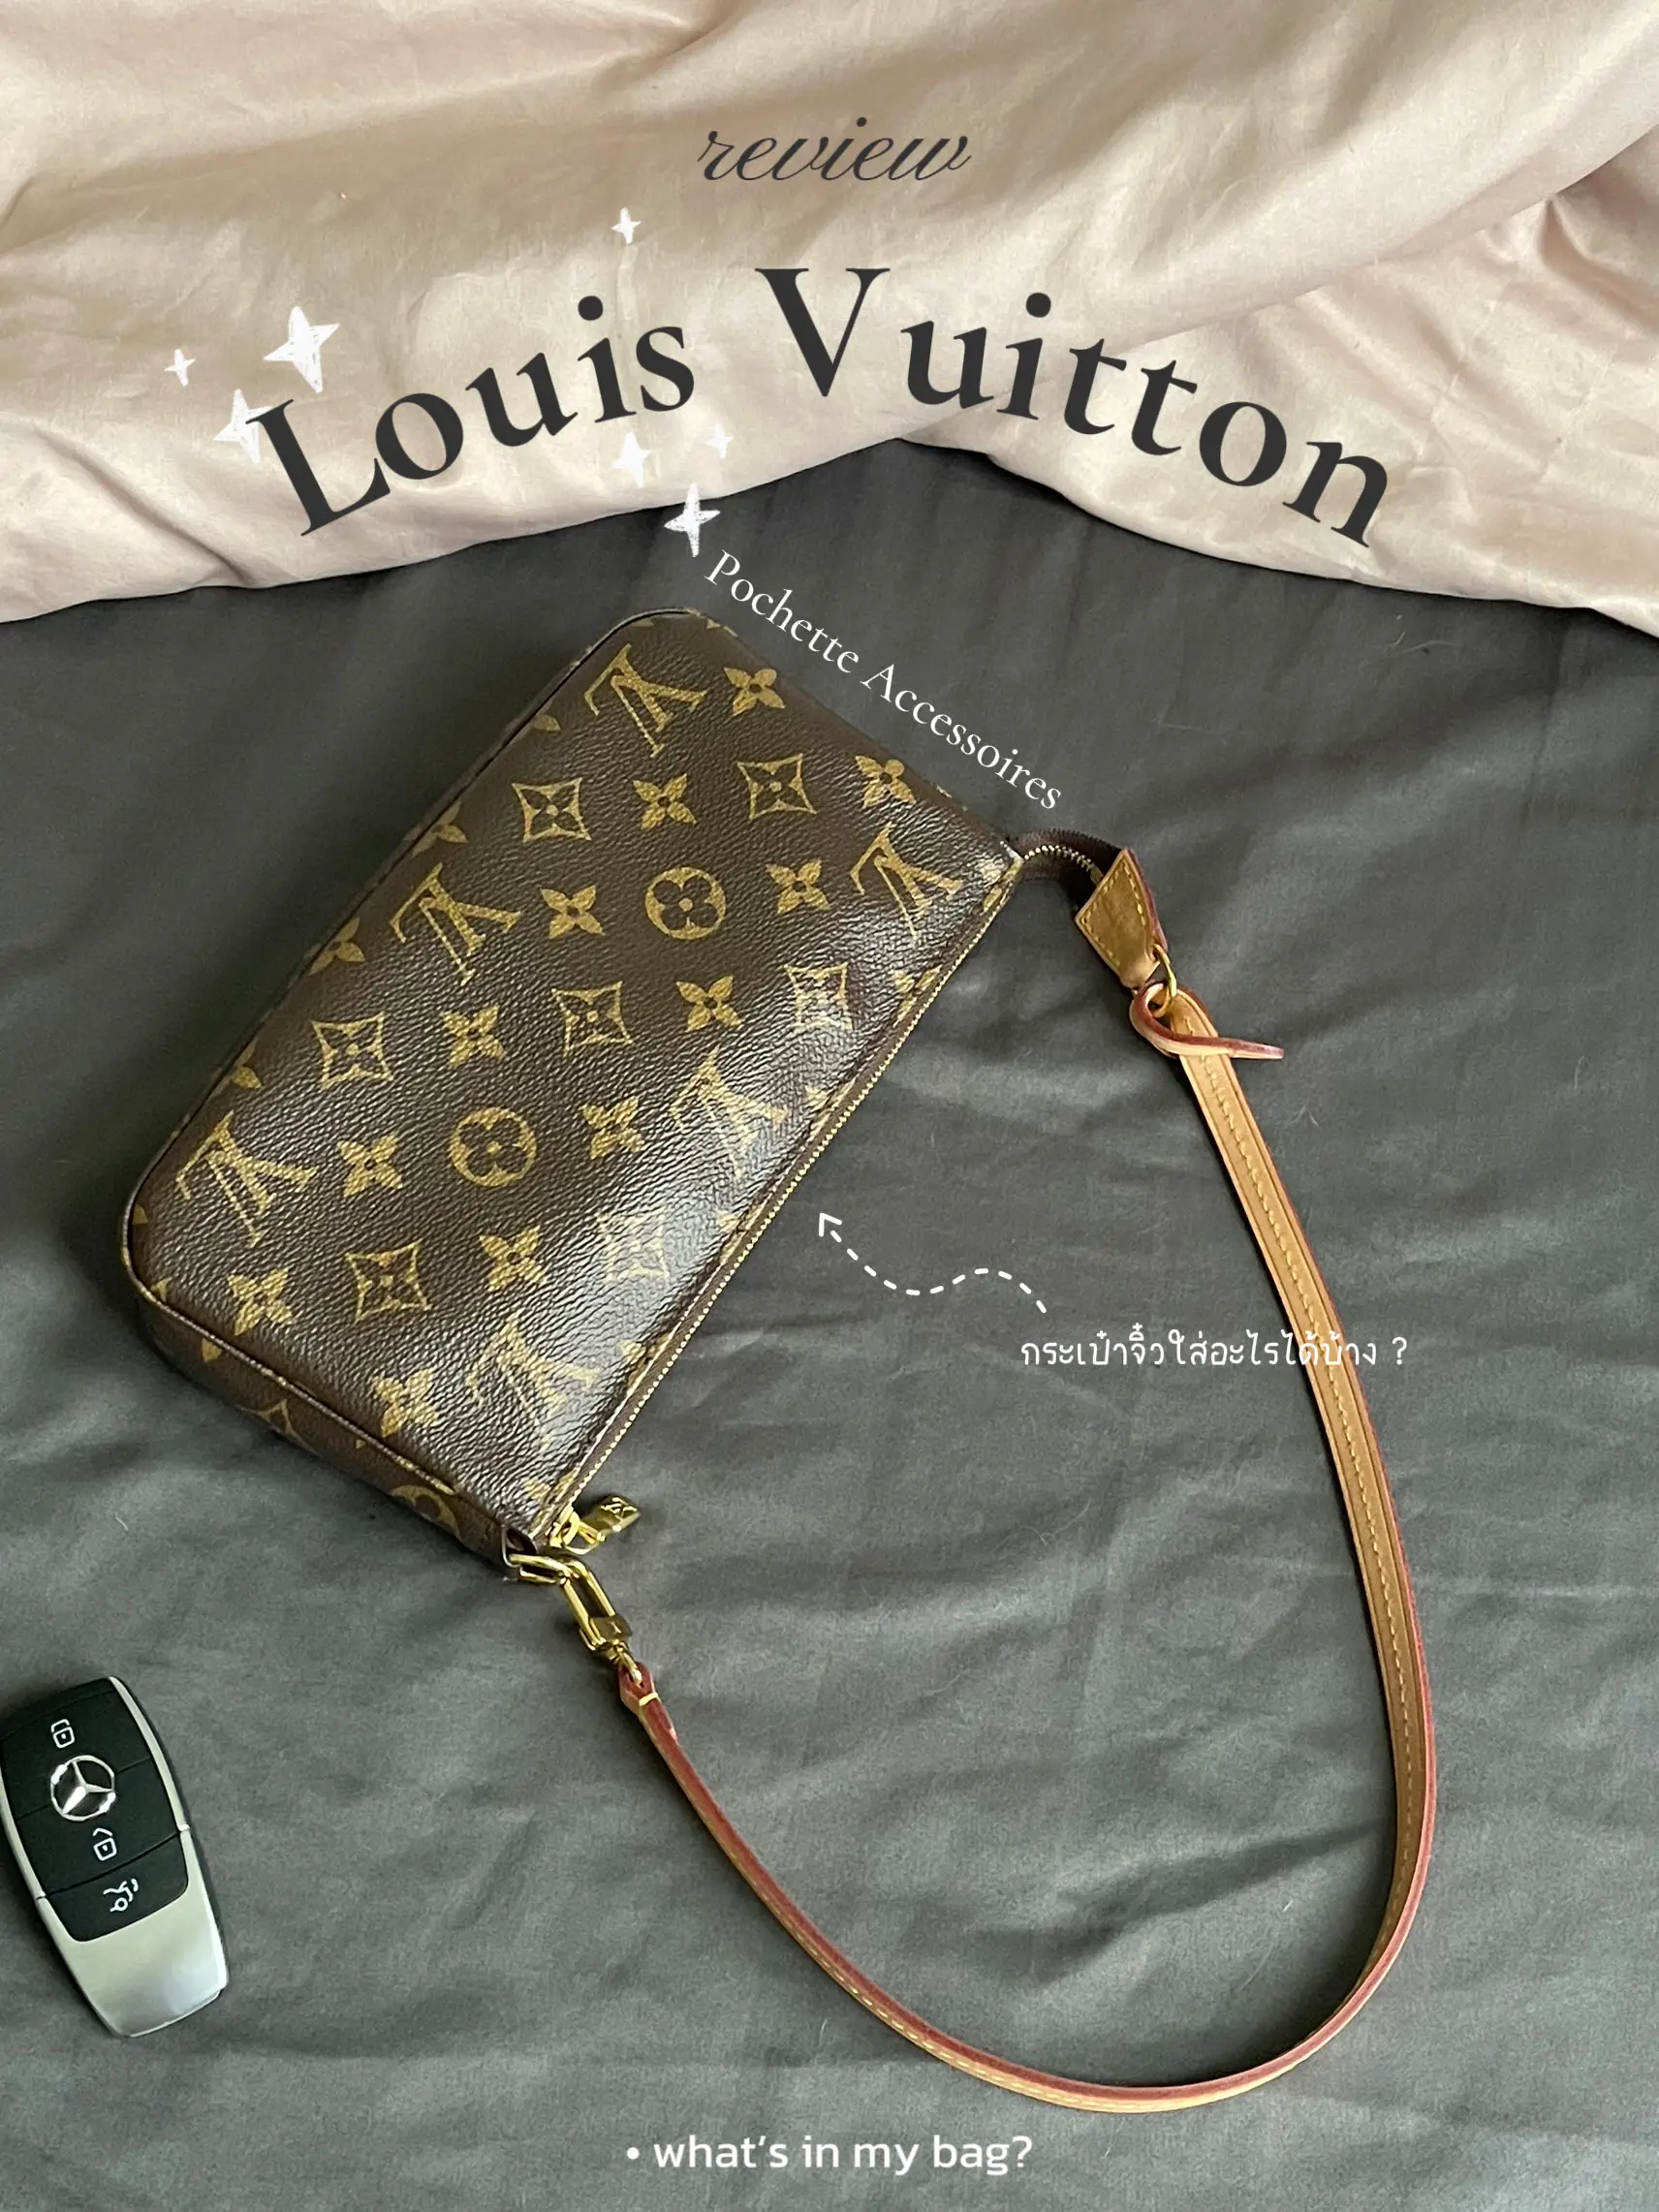 ROSE PINK LV COUSSIN BAG UNBOXING + WHATS IN MY BAG 